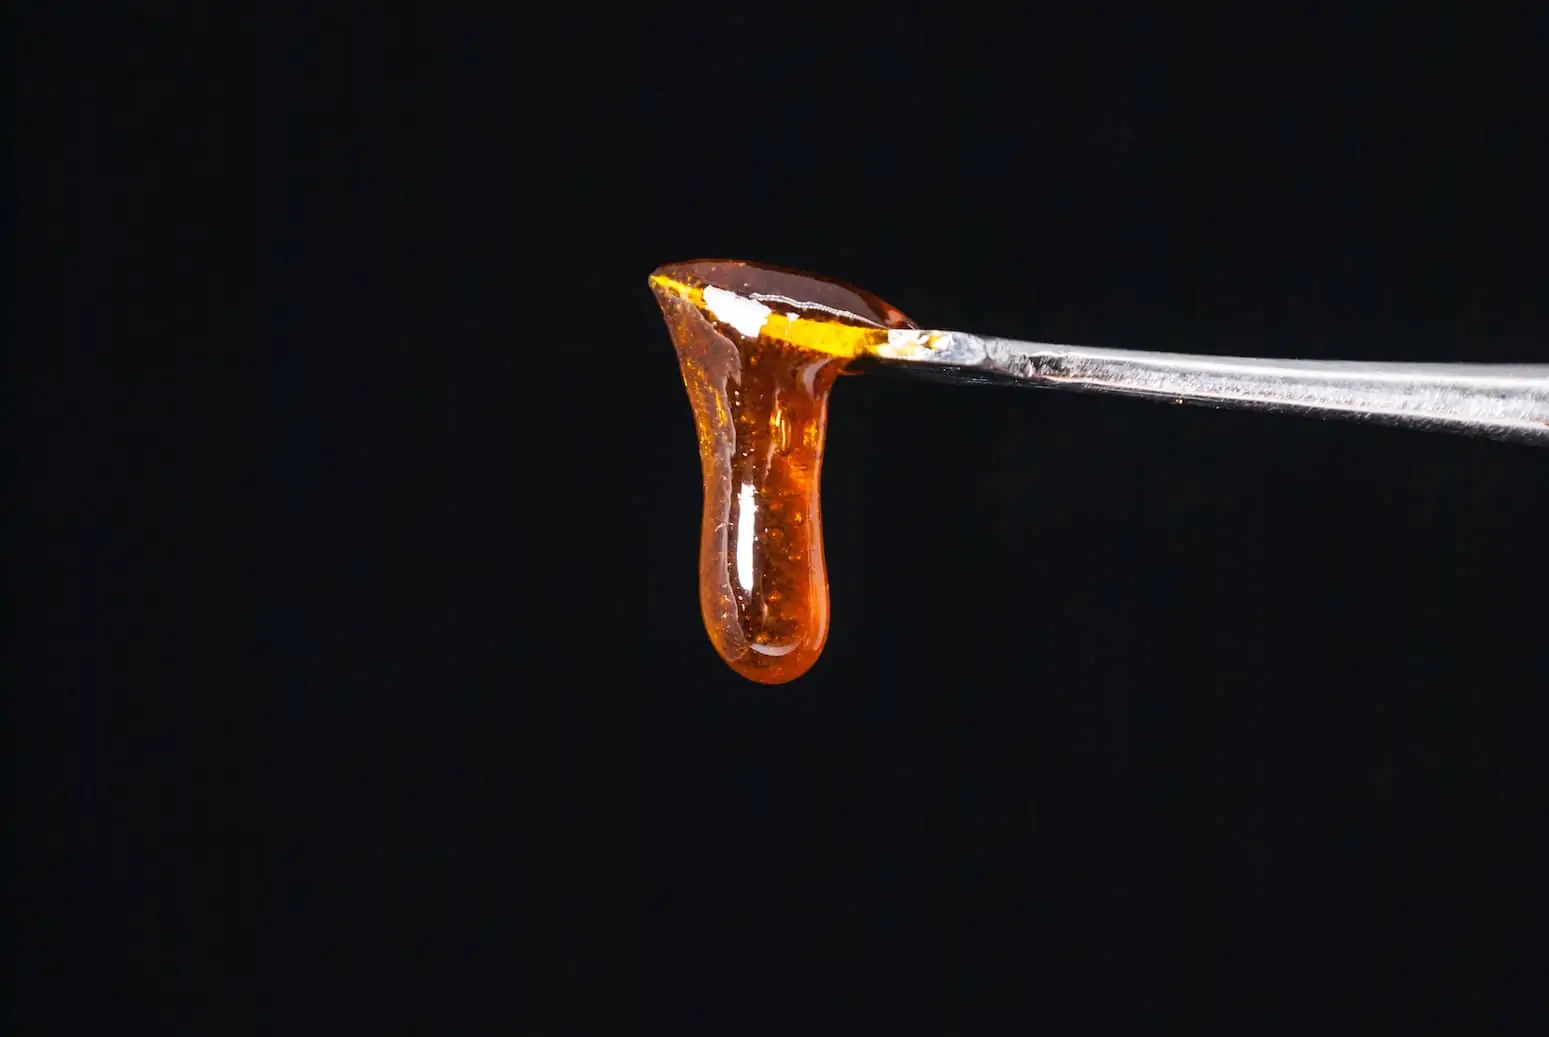 How to Dab and Make Dabs: A Beginner’s Guide